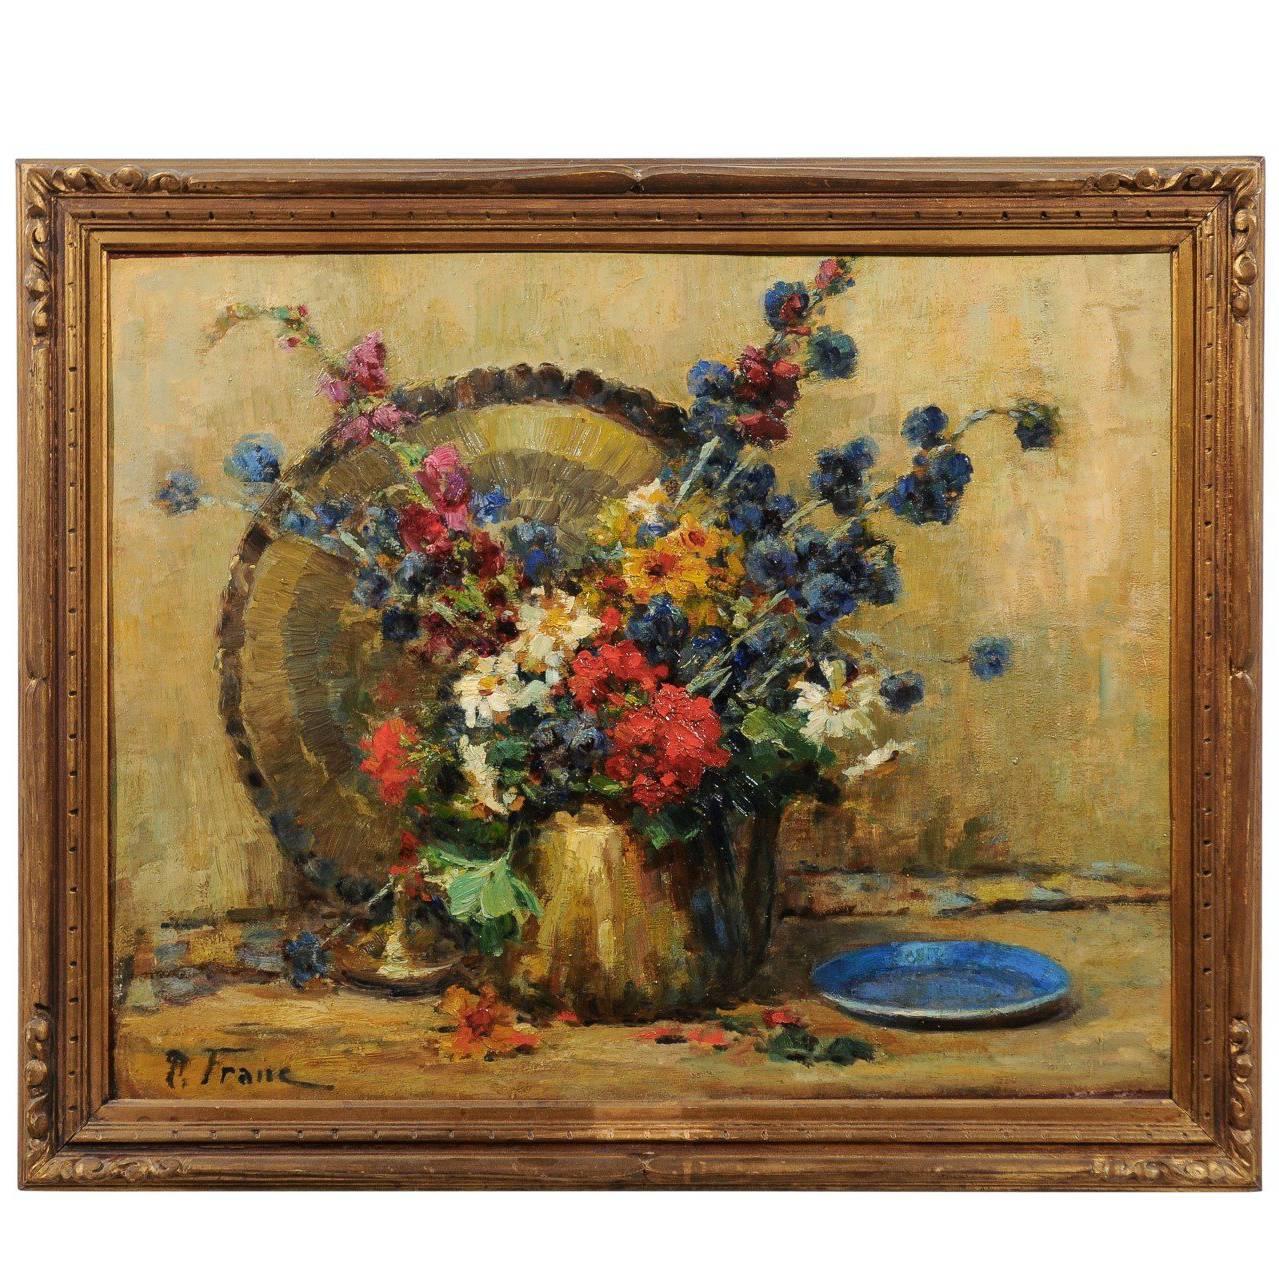 French 19th Century Still-Life Floral Painting by Pierre Franc in Giltwood Frame